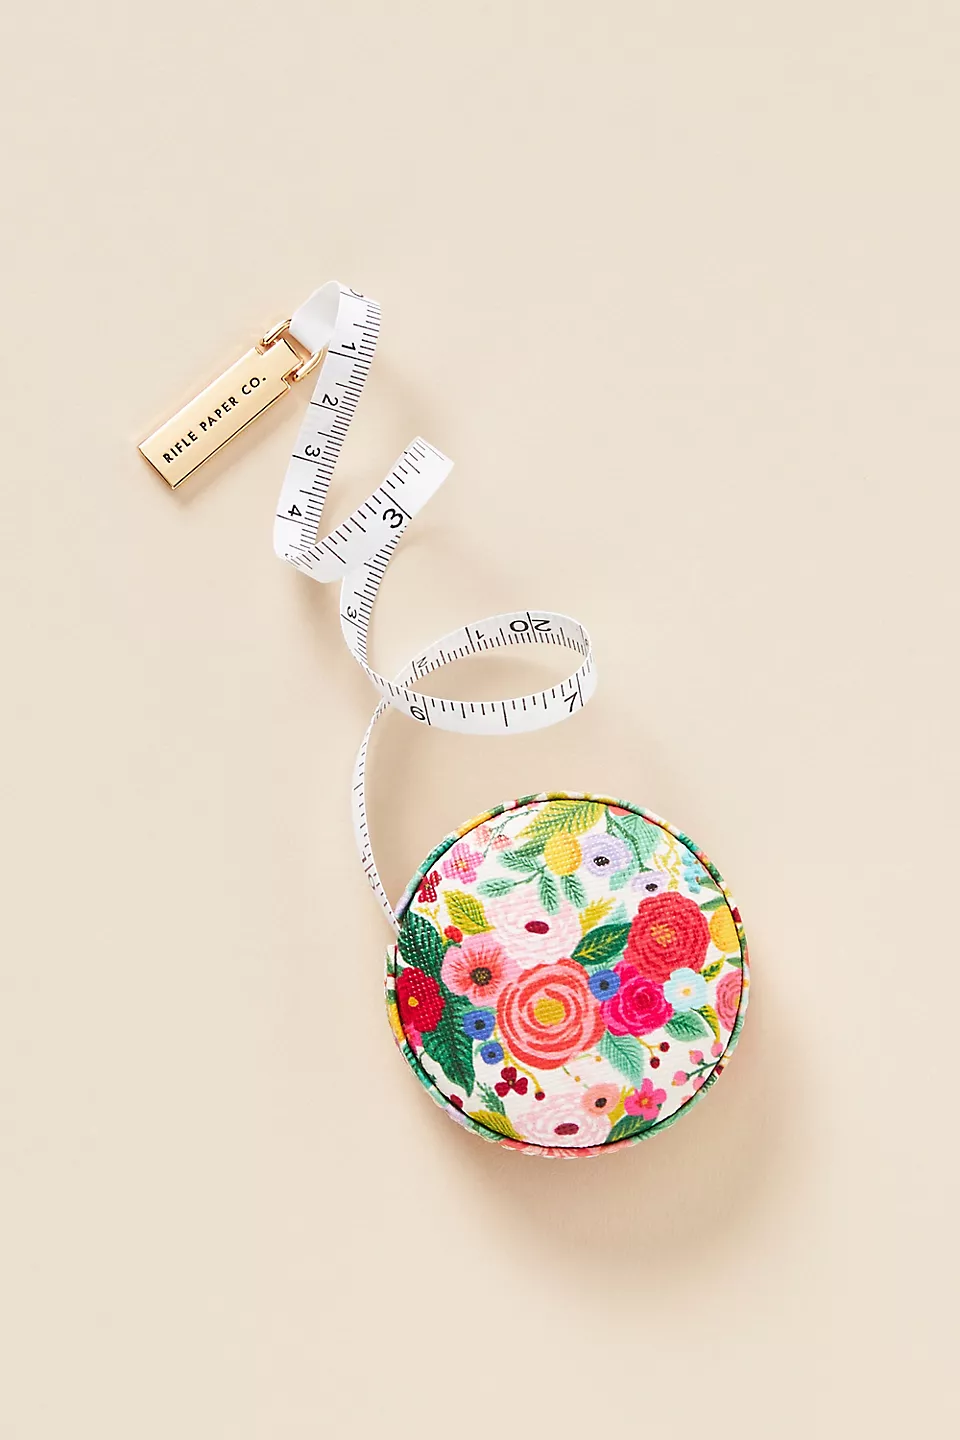 anthropologie.com | Rifle Paper Co. Garden Party Measuring Tape